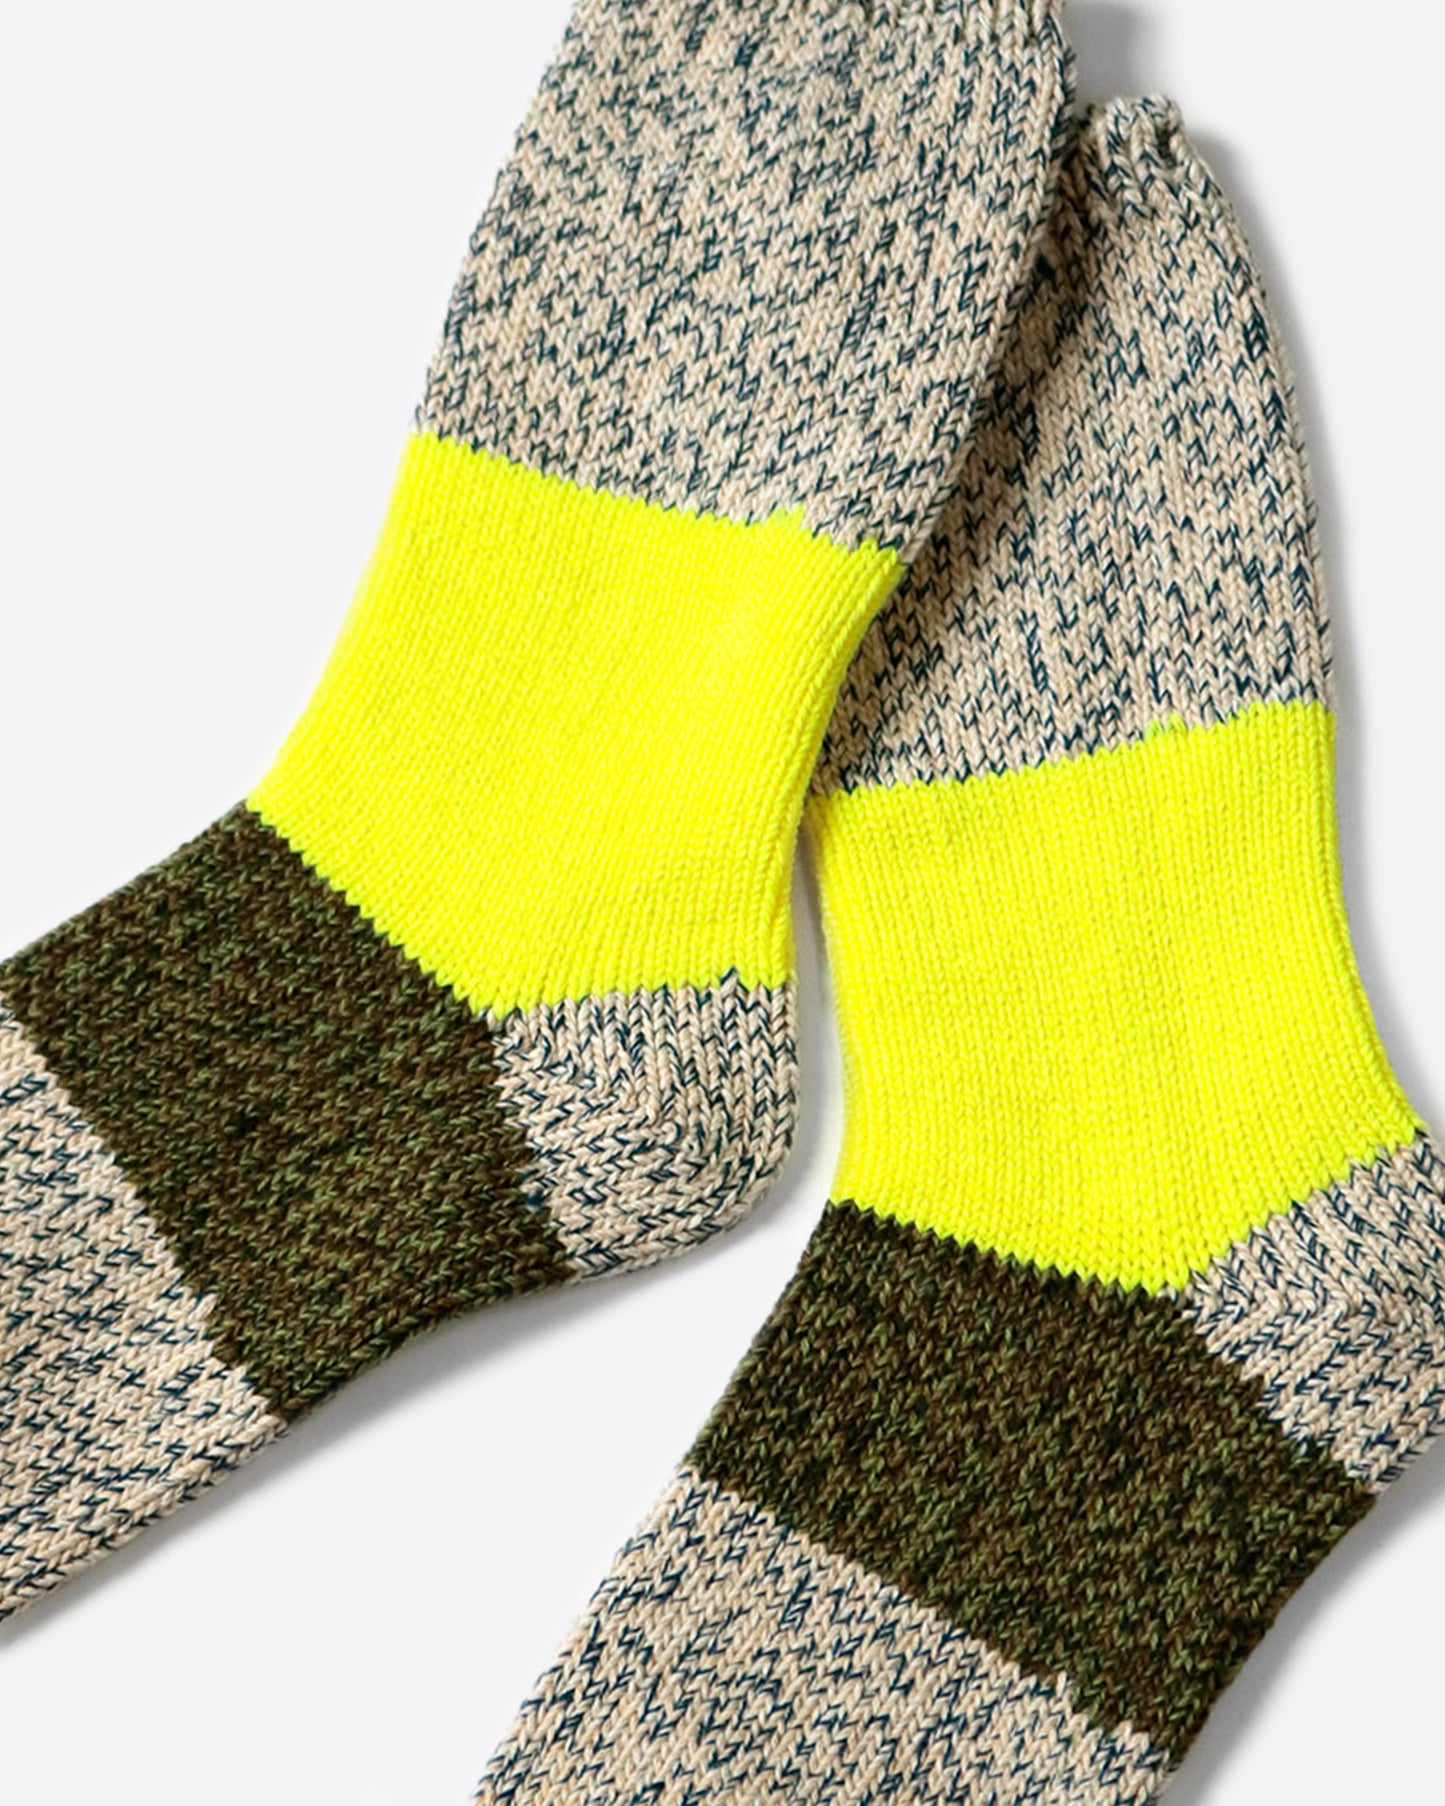 These thick heather gray socks are rich and fluffy with wide neon yellow and olive green stripes down the center.